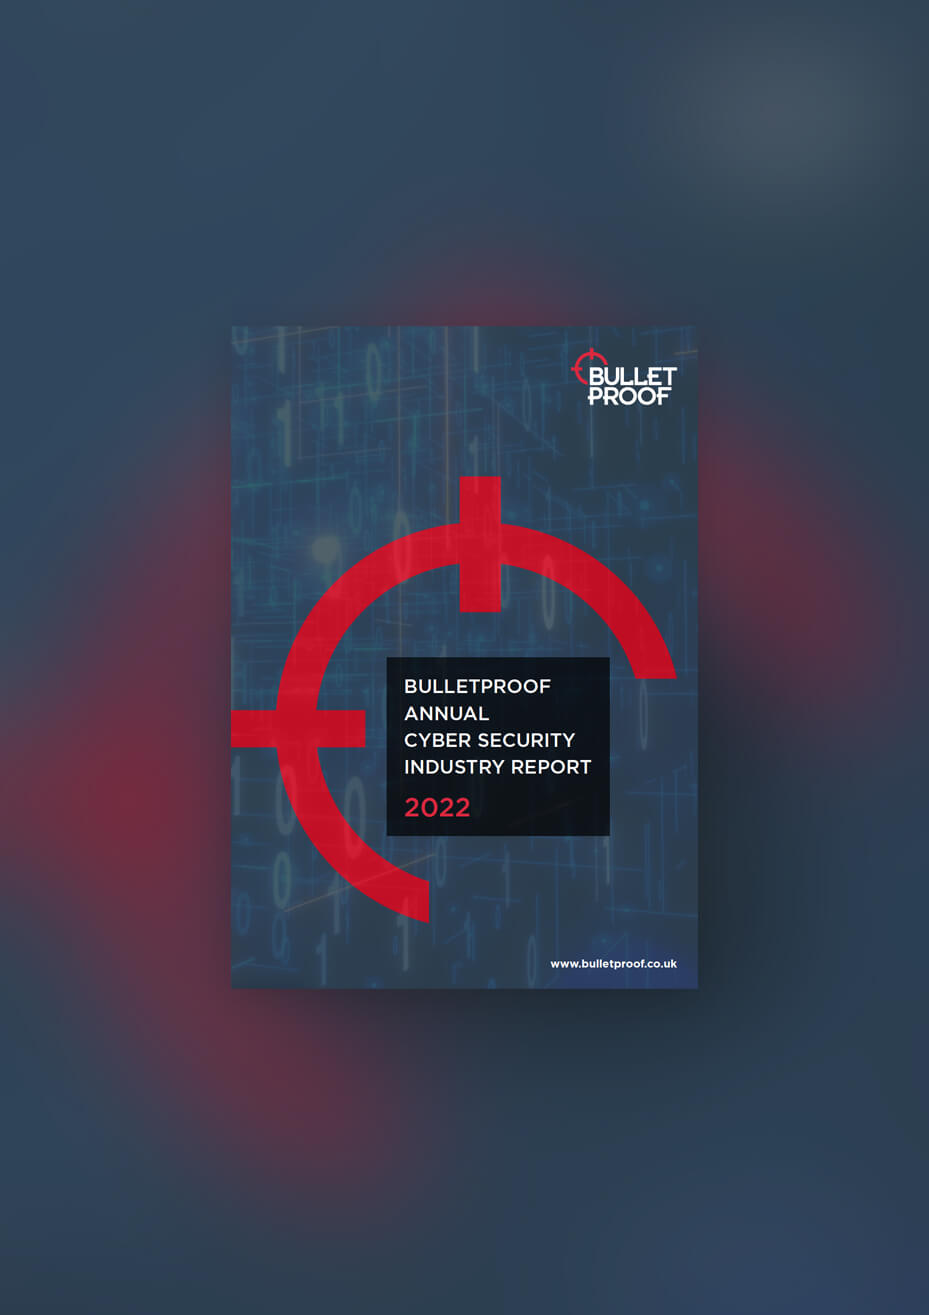 Bulletproof Annual Cyber Security Industry Report 2022